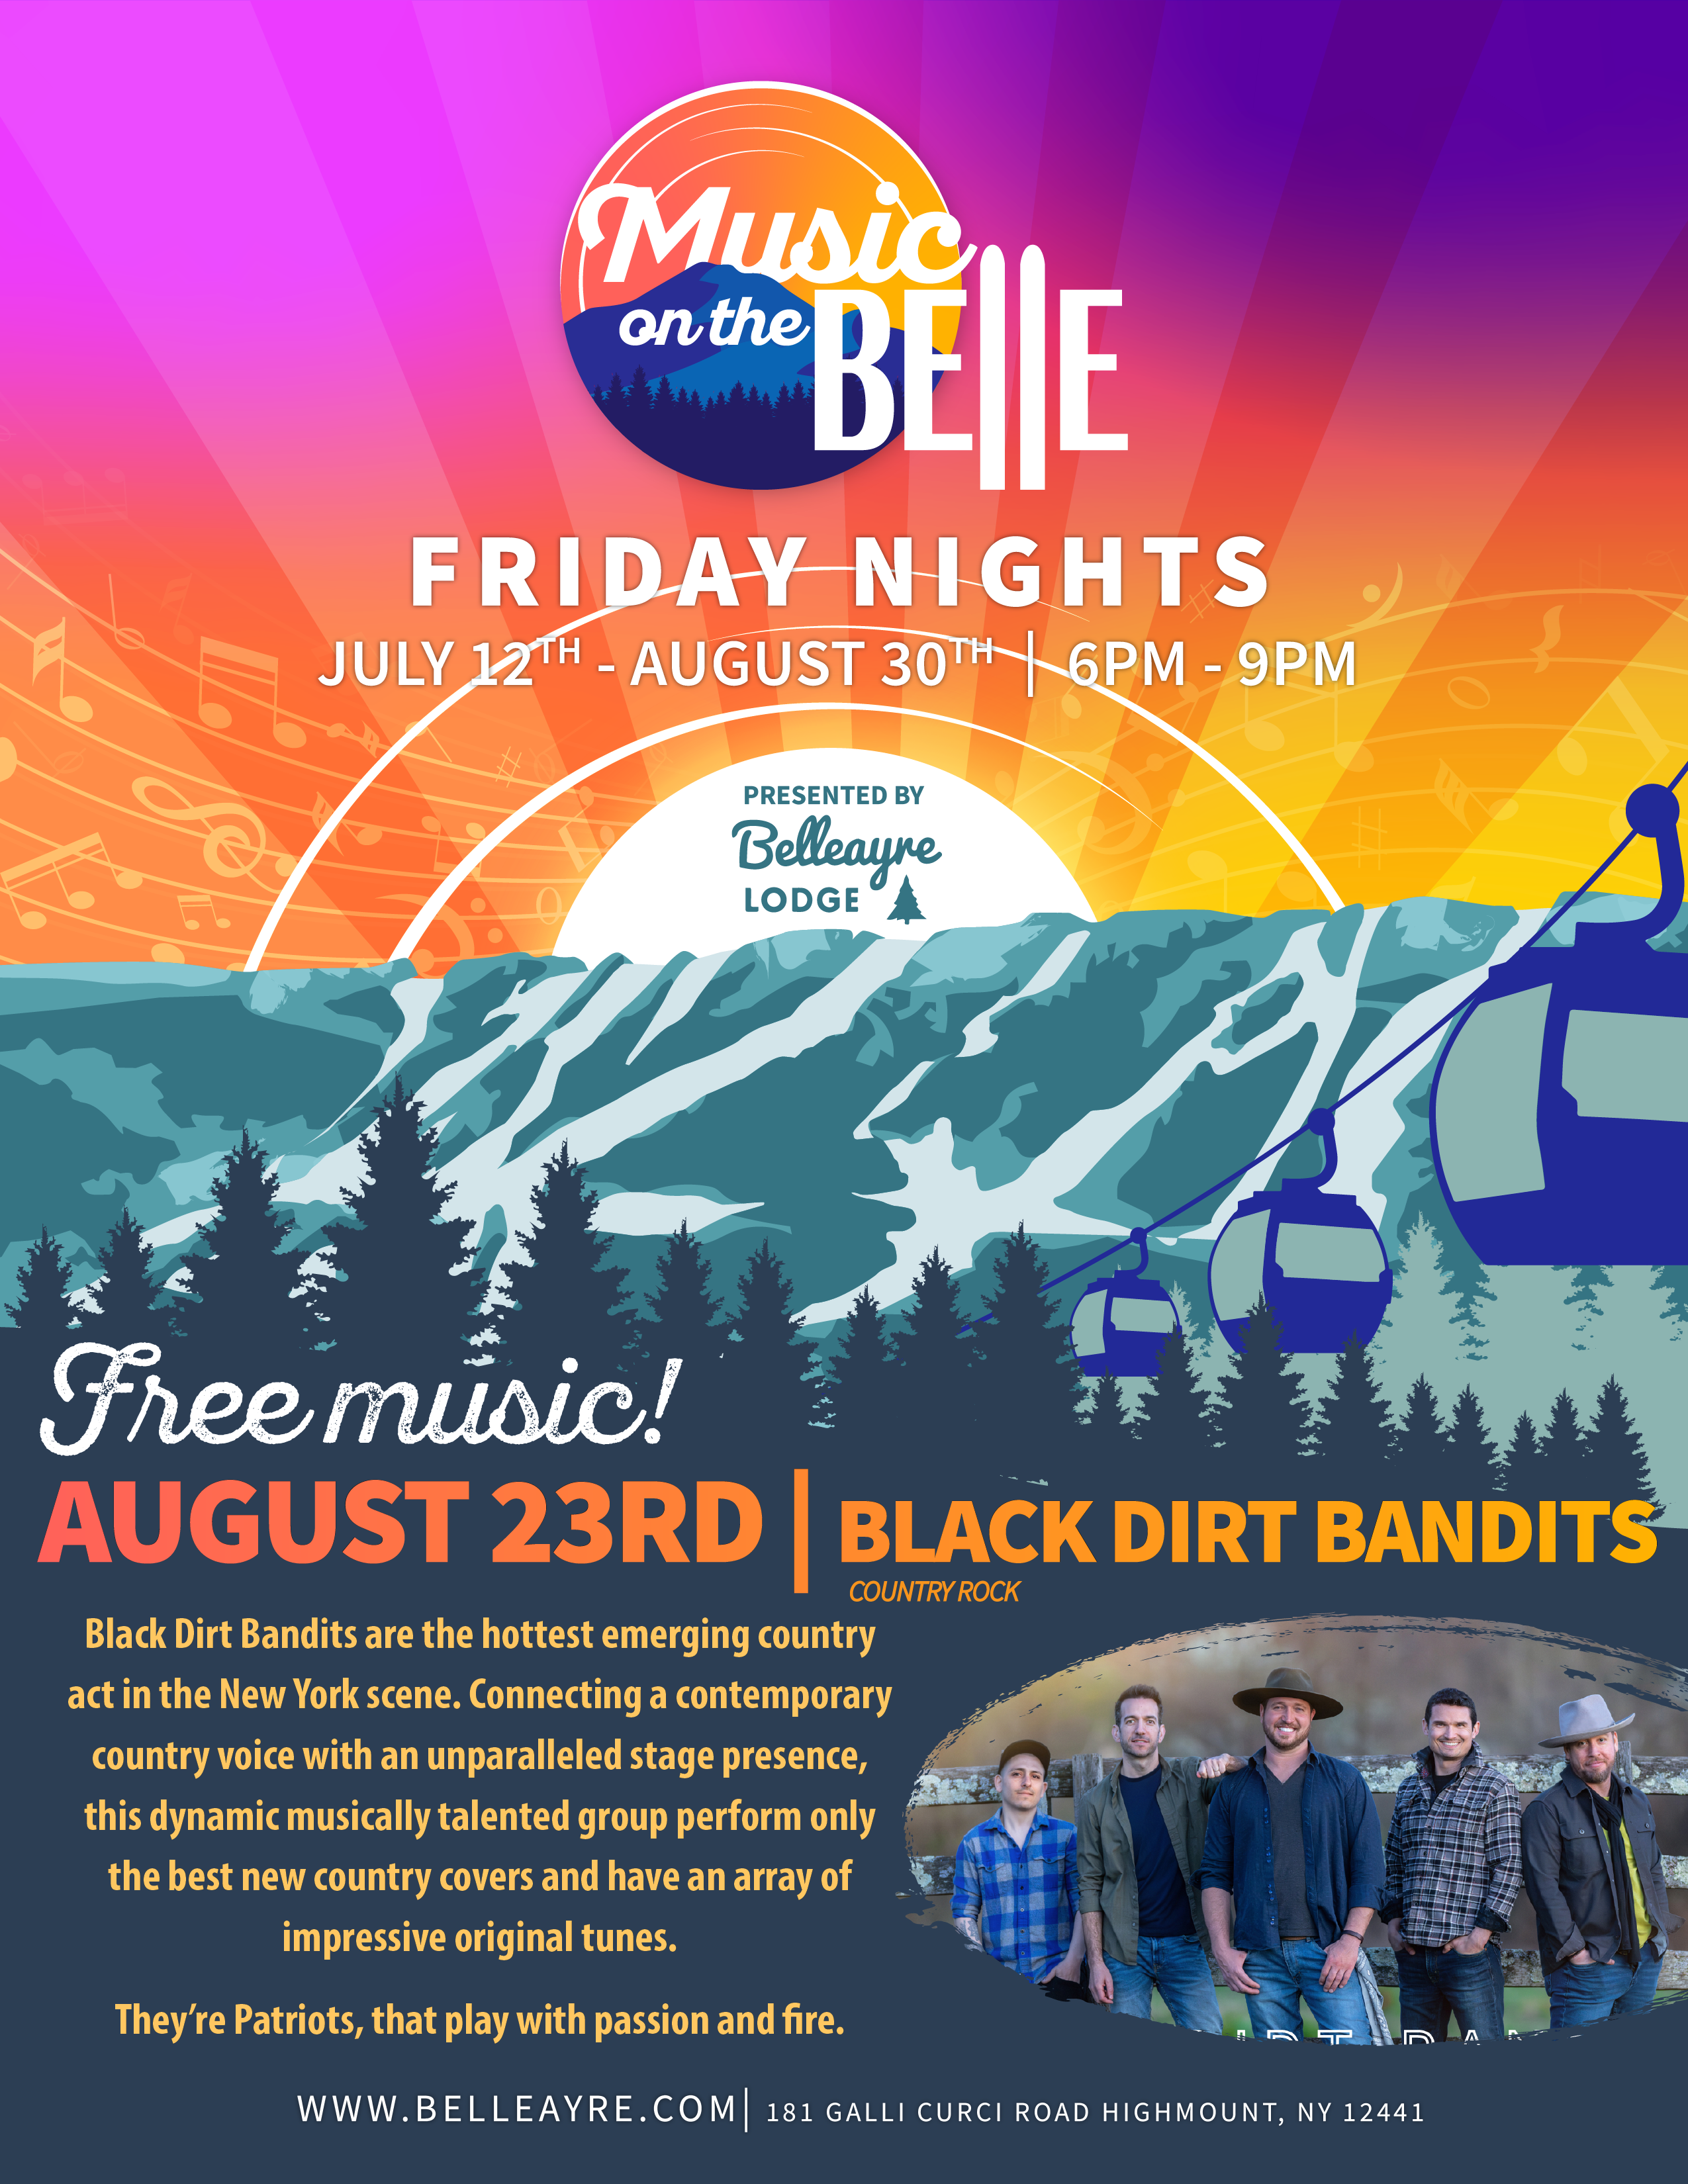 Black Dirt Bandits Music on the Belle Friday Nights flyer August 23rd